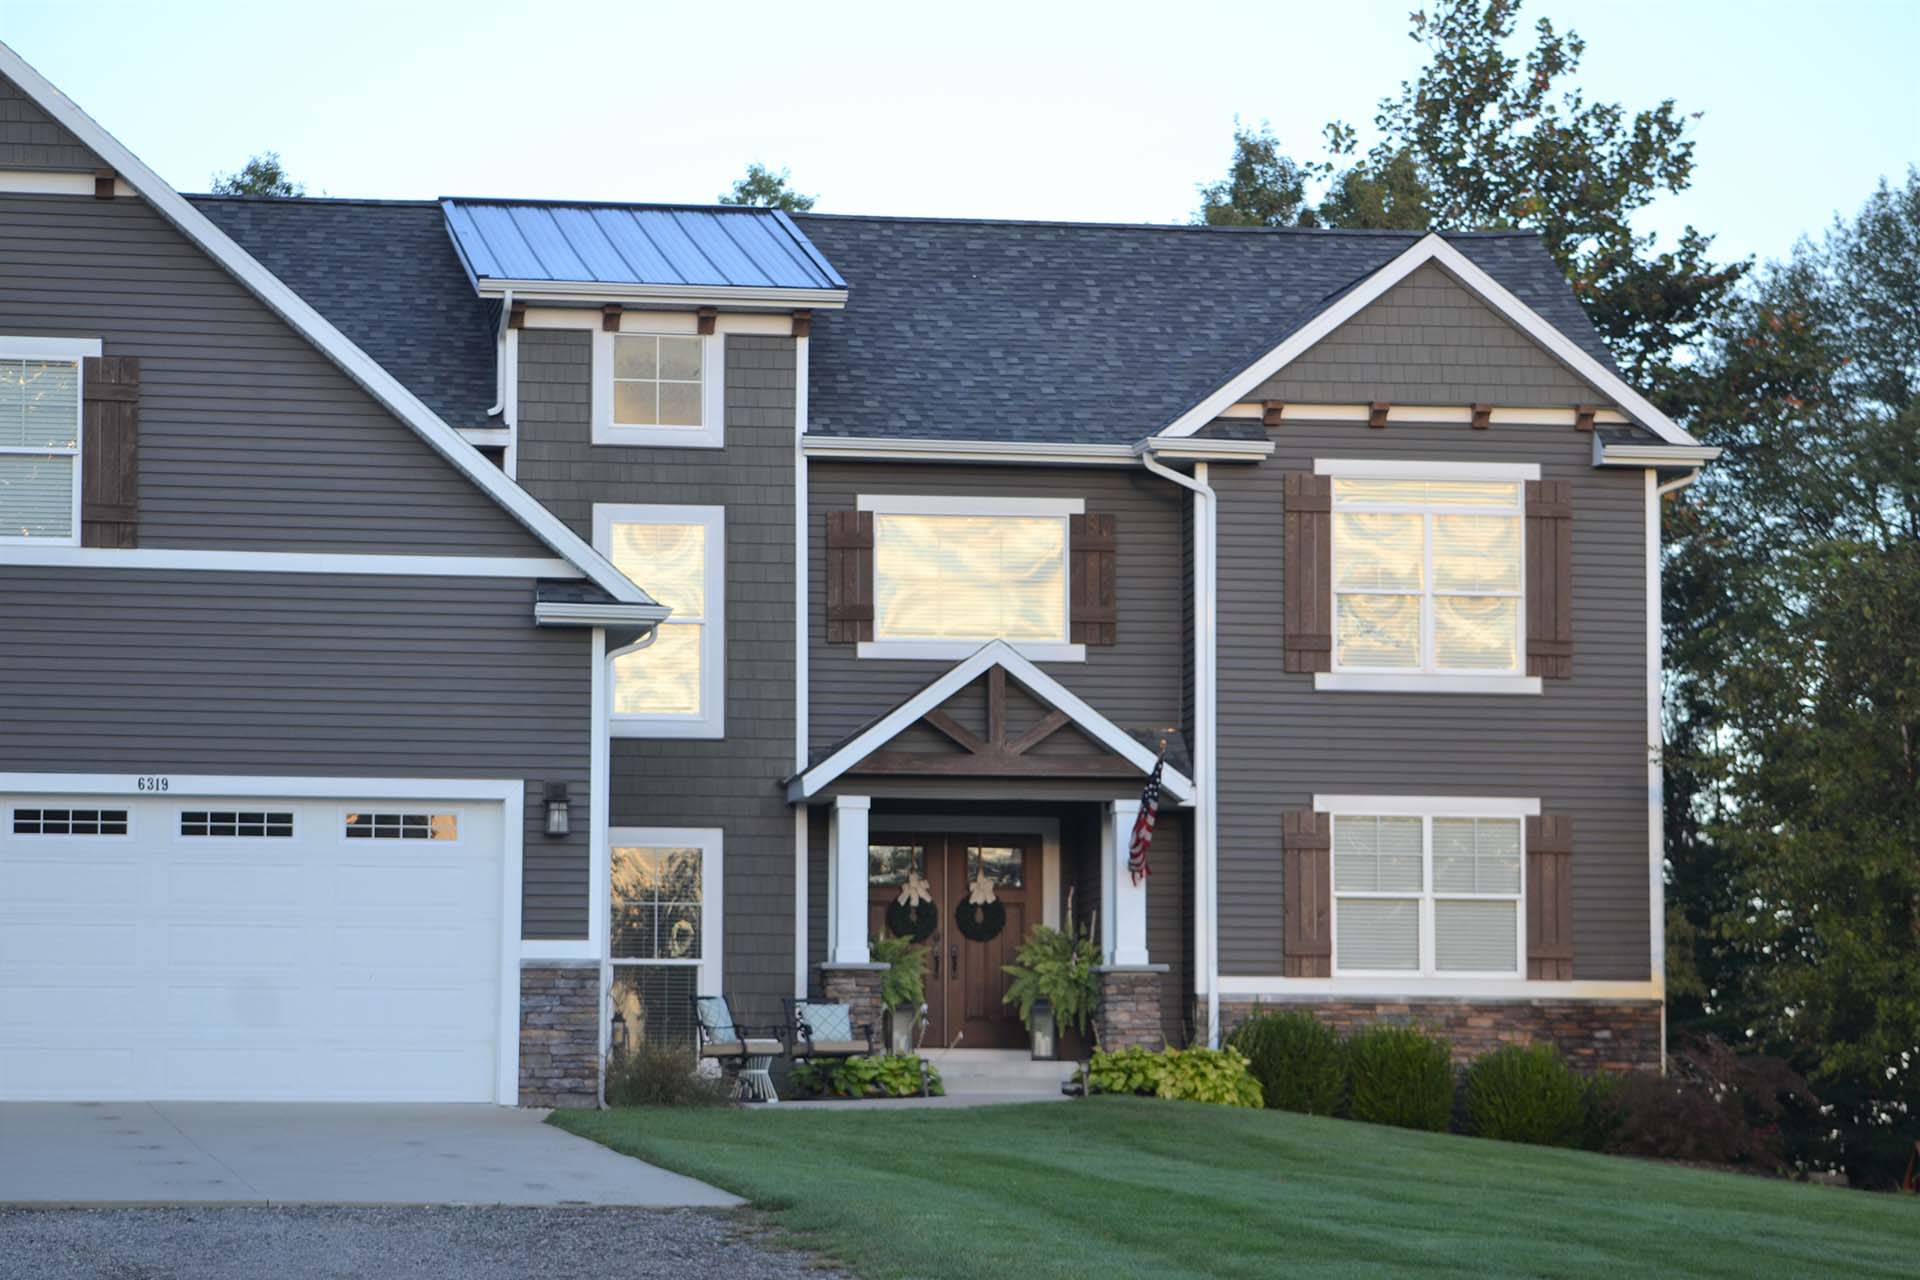 How New Windows And Vinyl Siding Can Reduce Energy Costs